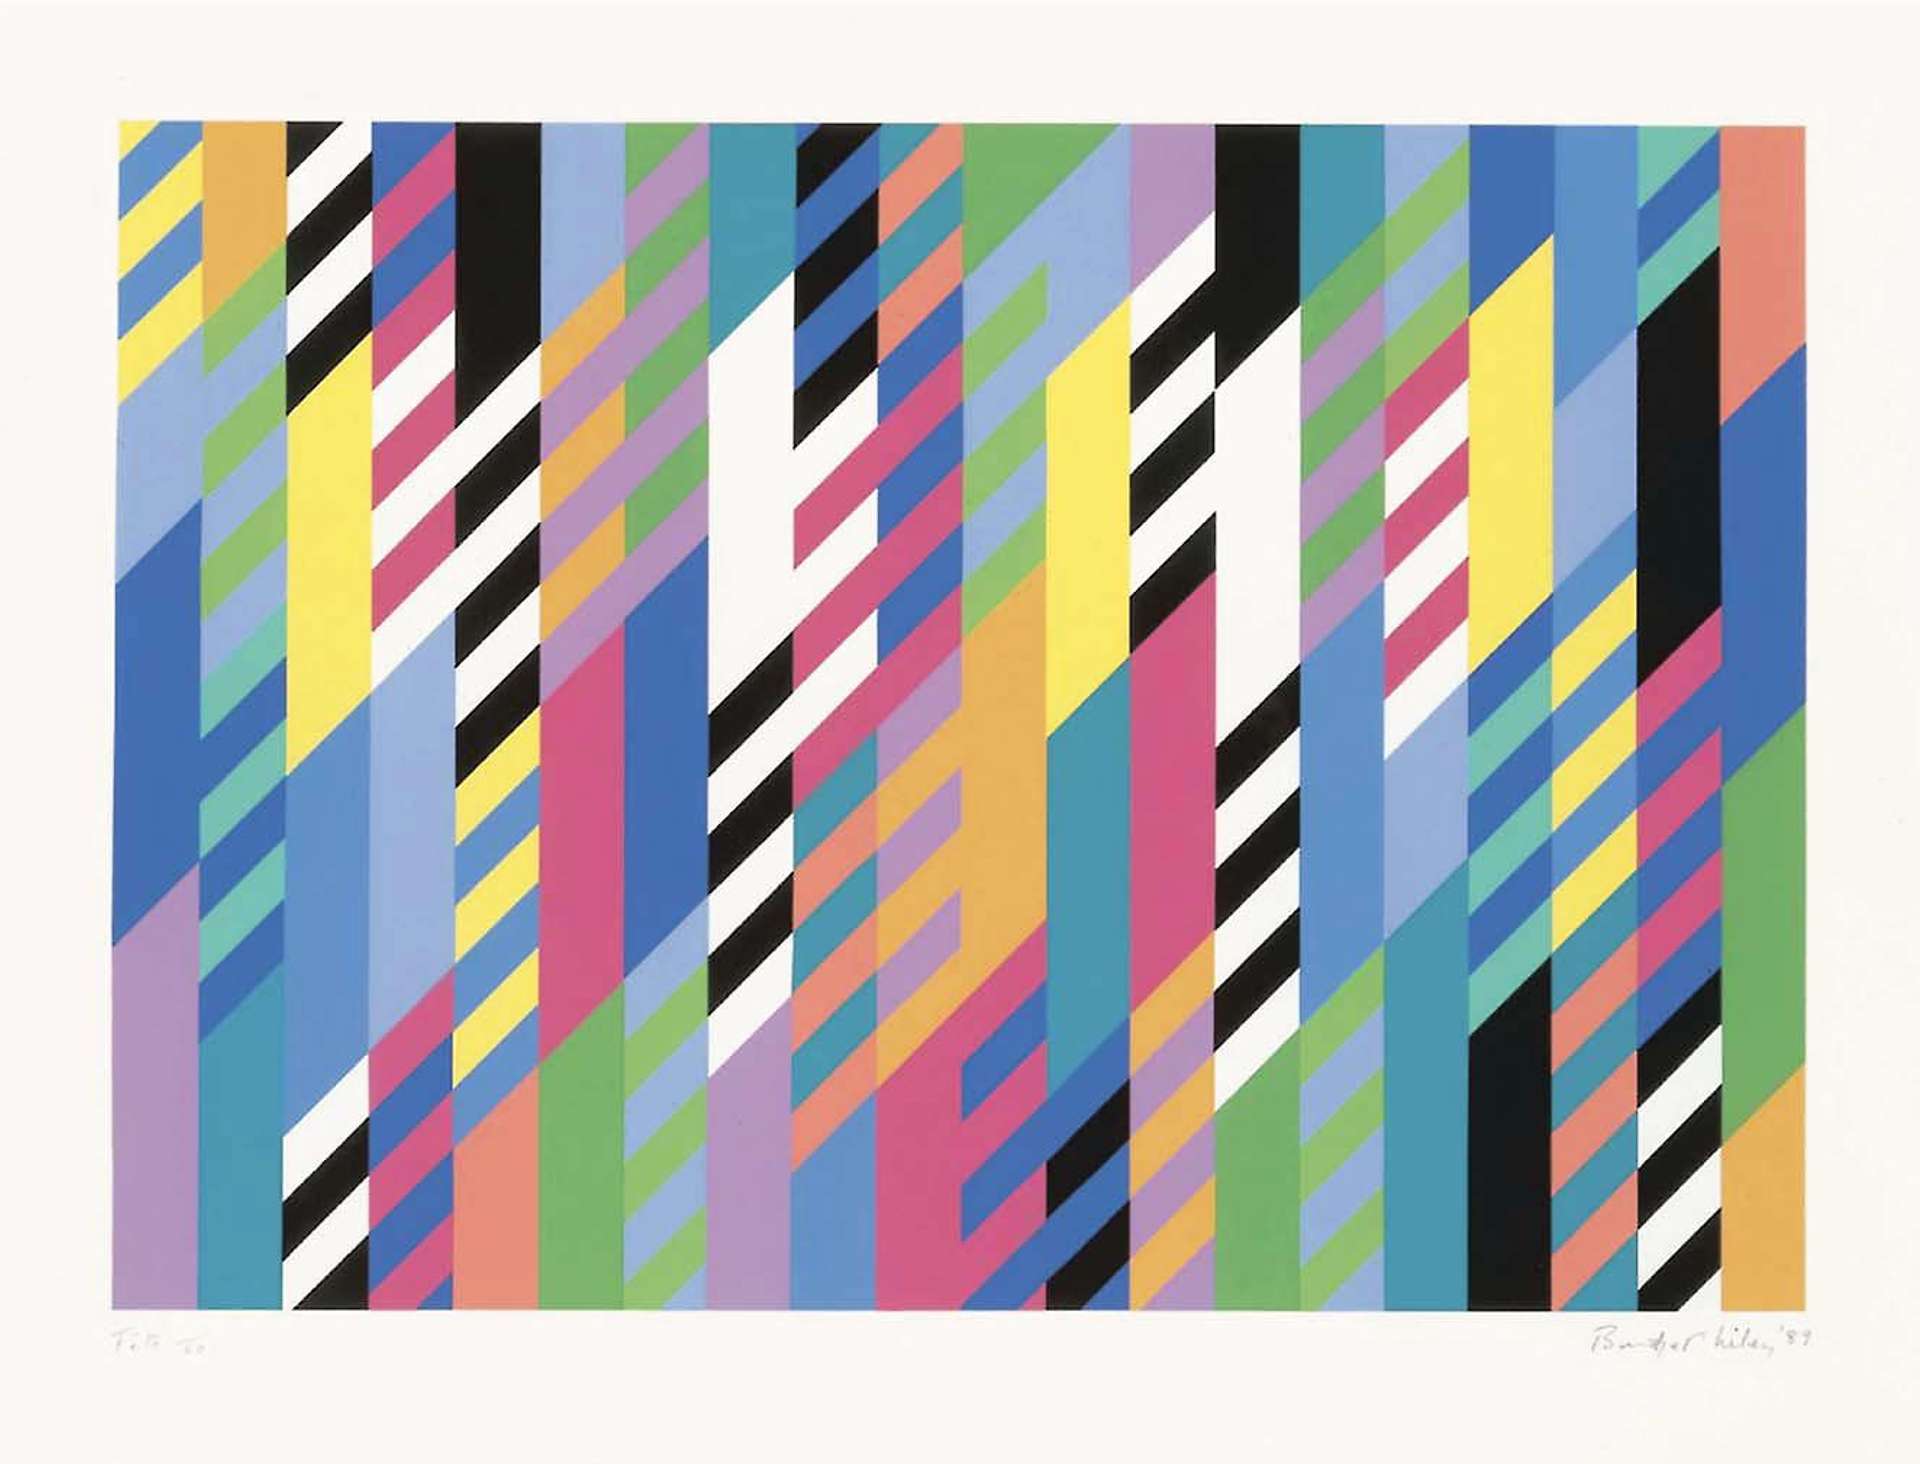 Fête by Bridget Riley, a print similar to the painting owned by HSBC. 